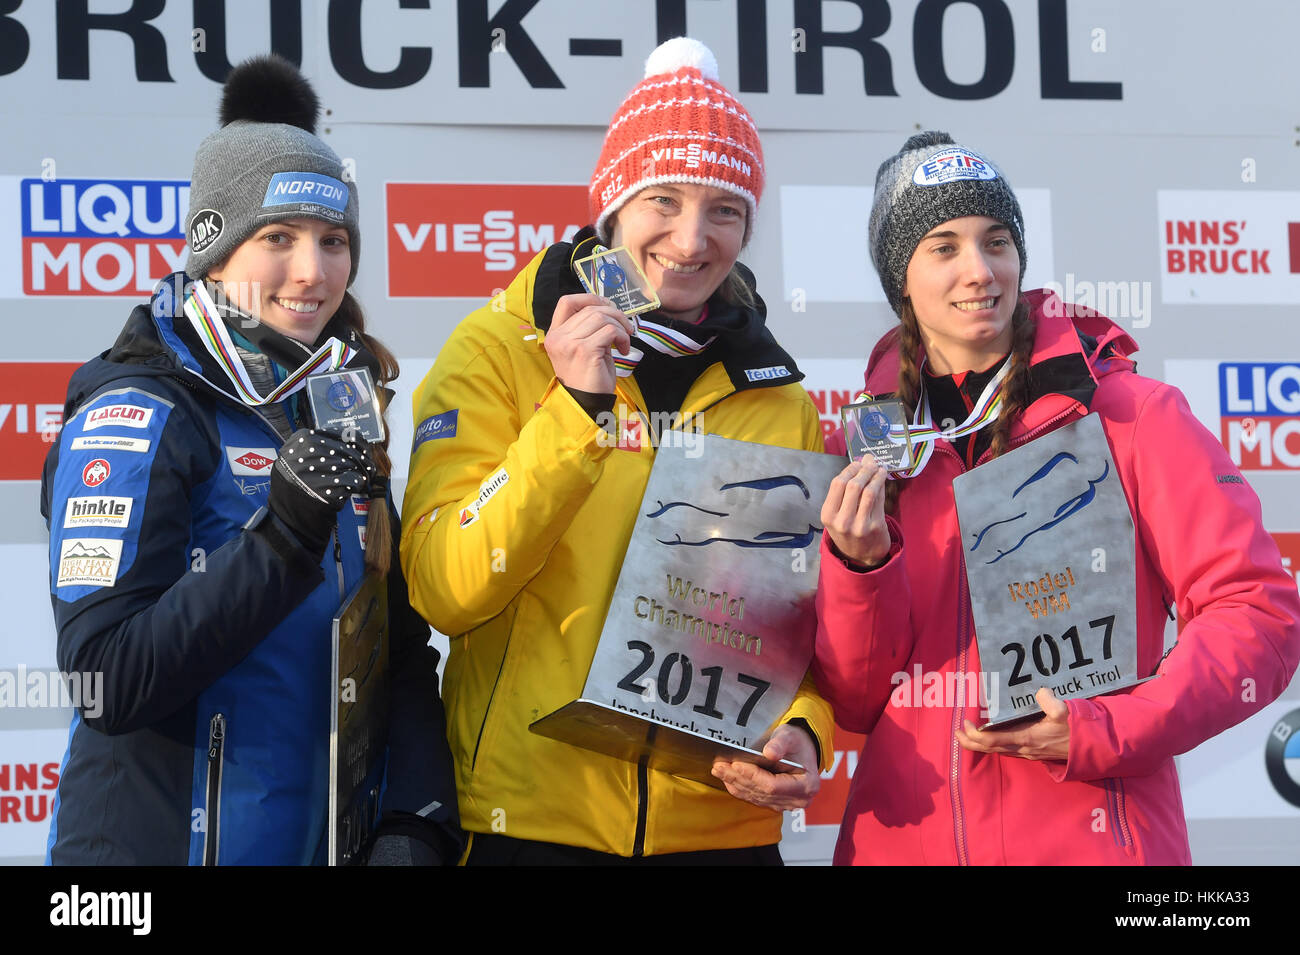 Innsbruck, Austria. 28th Jan, 2017. US American luger Erin Hamlin (2nd place, L-R), German luger Tatjana Hüfner (1st place), and Canadian luger Kimberley McRae (3rd place) hold up their medals for women's singles during the victory ceremony at the Luge World Cup in Innsbruck, Austria, 28 January 2017. Photo: Tobias Hase/dpa/Alamy Live News Stock Photo